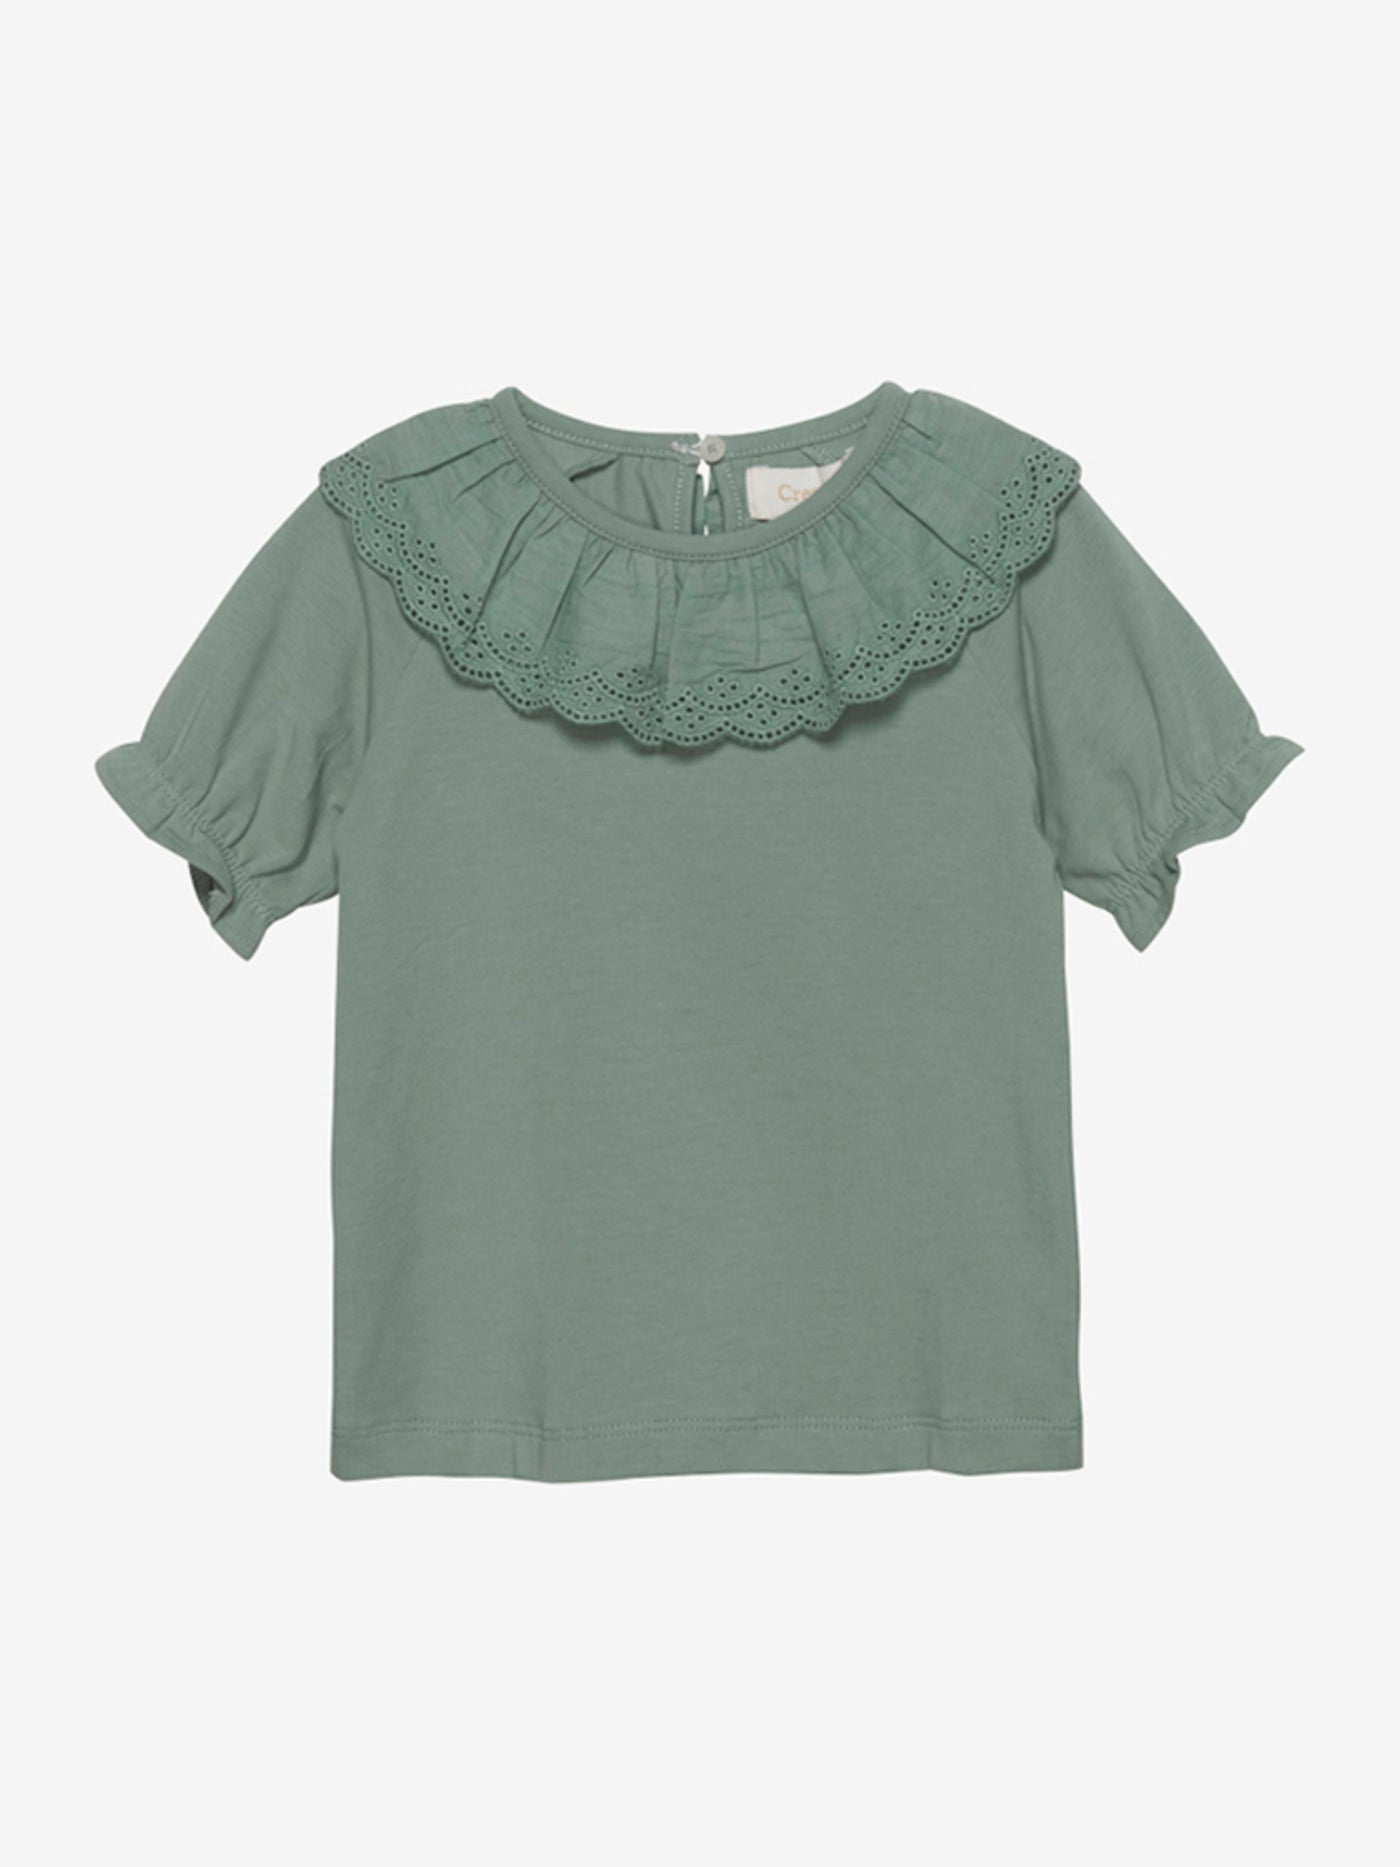 CREAMIE - T-shirt SS Lace - Lily Pad